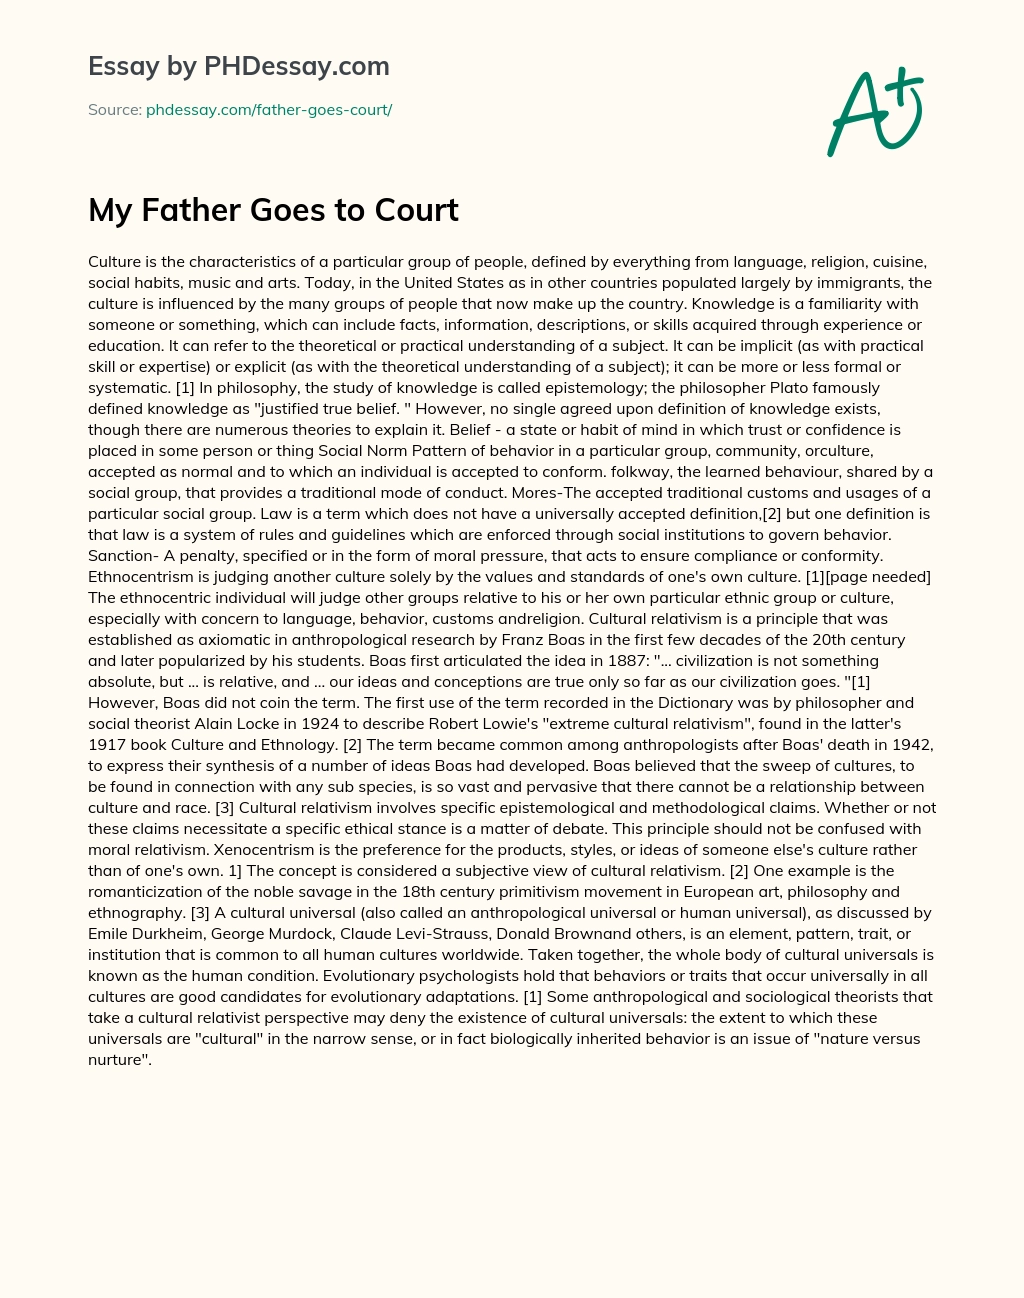 My Father Goes to Court essay